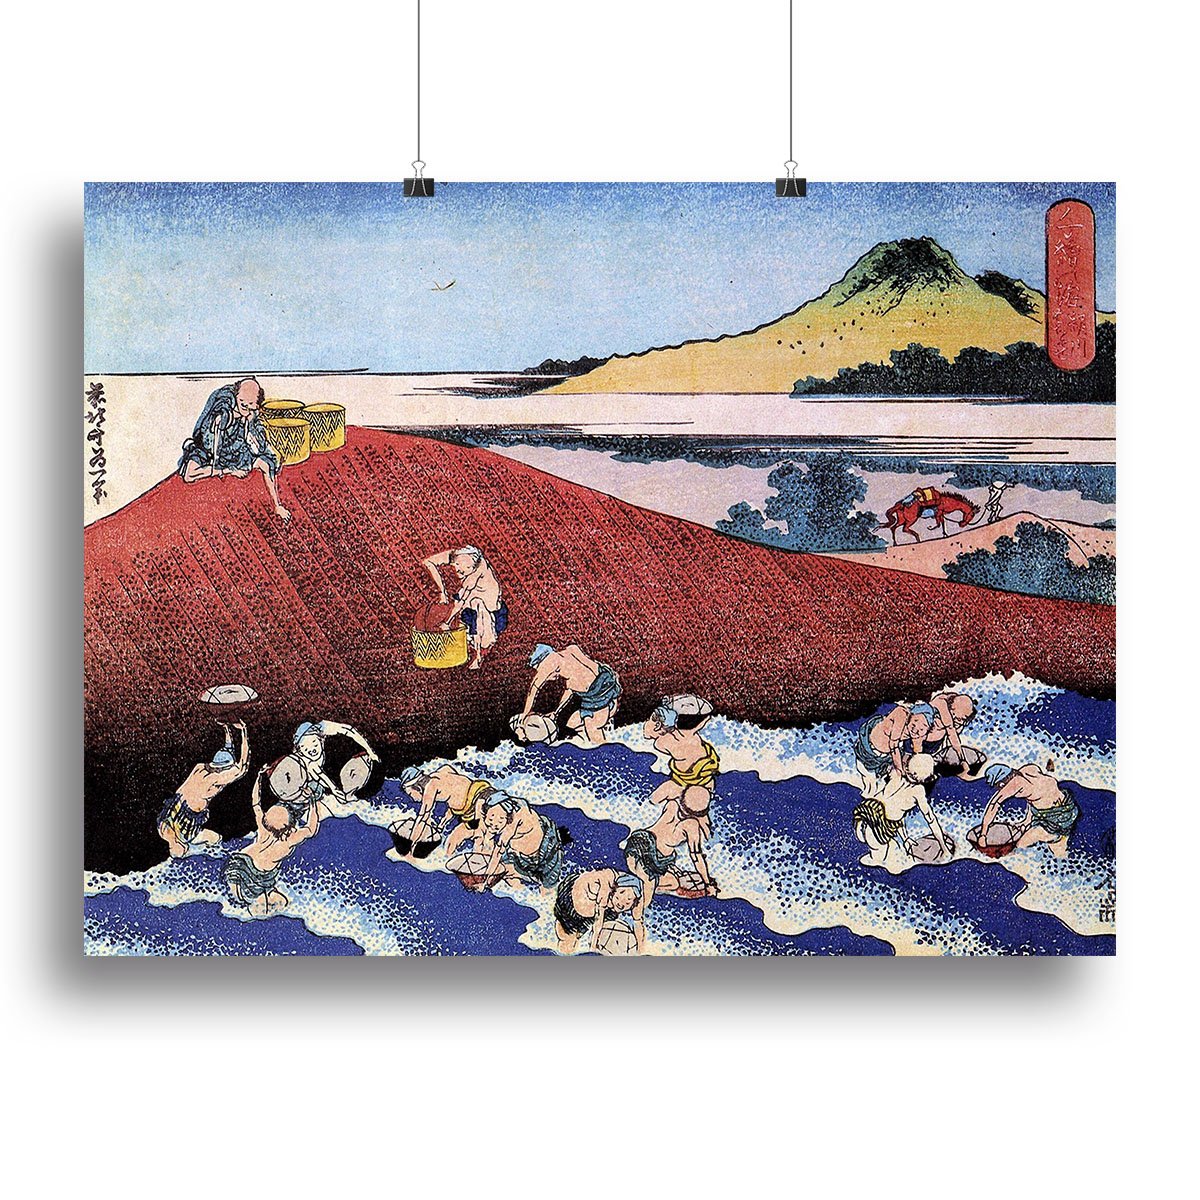 Ocean landscape with fishermen by Hokusai Canvas Print or Poster